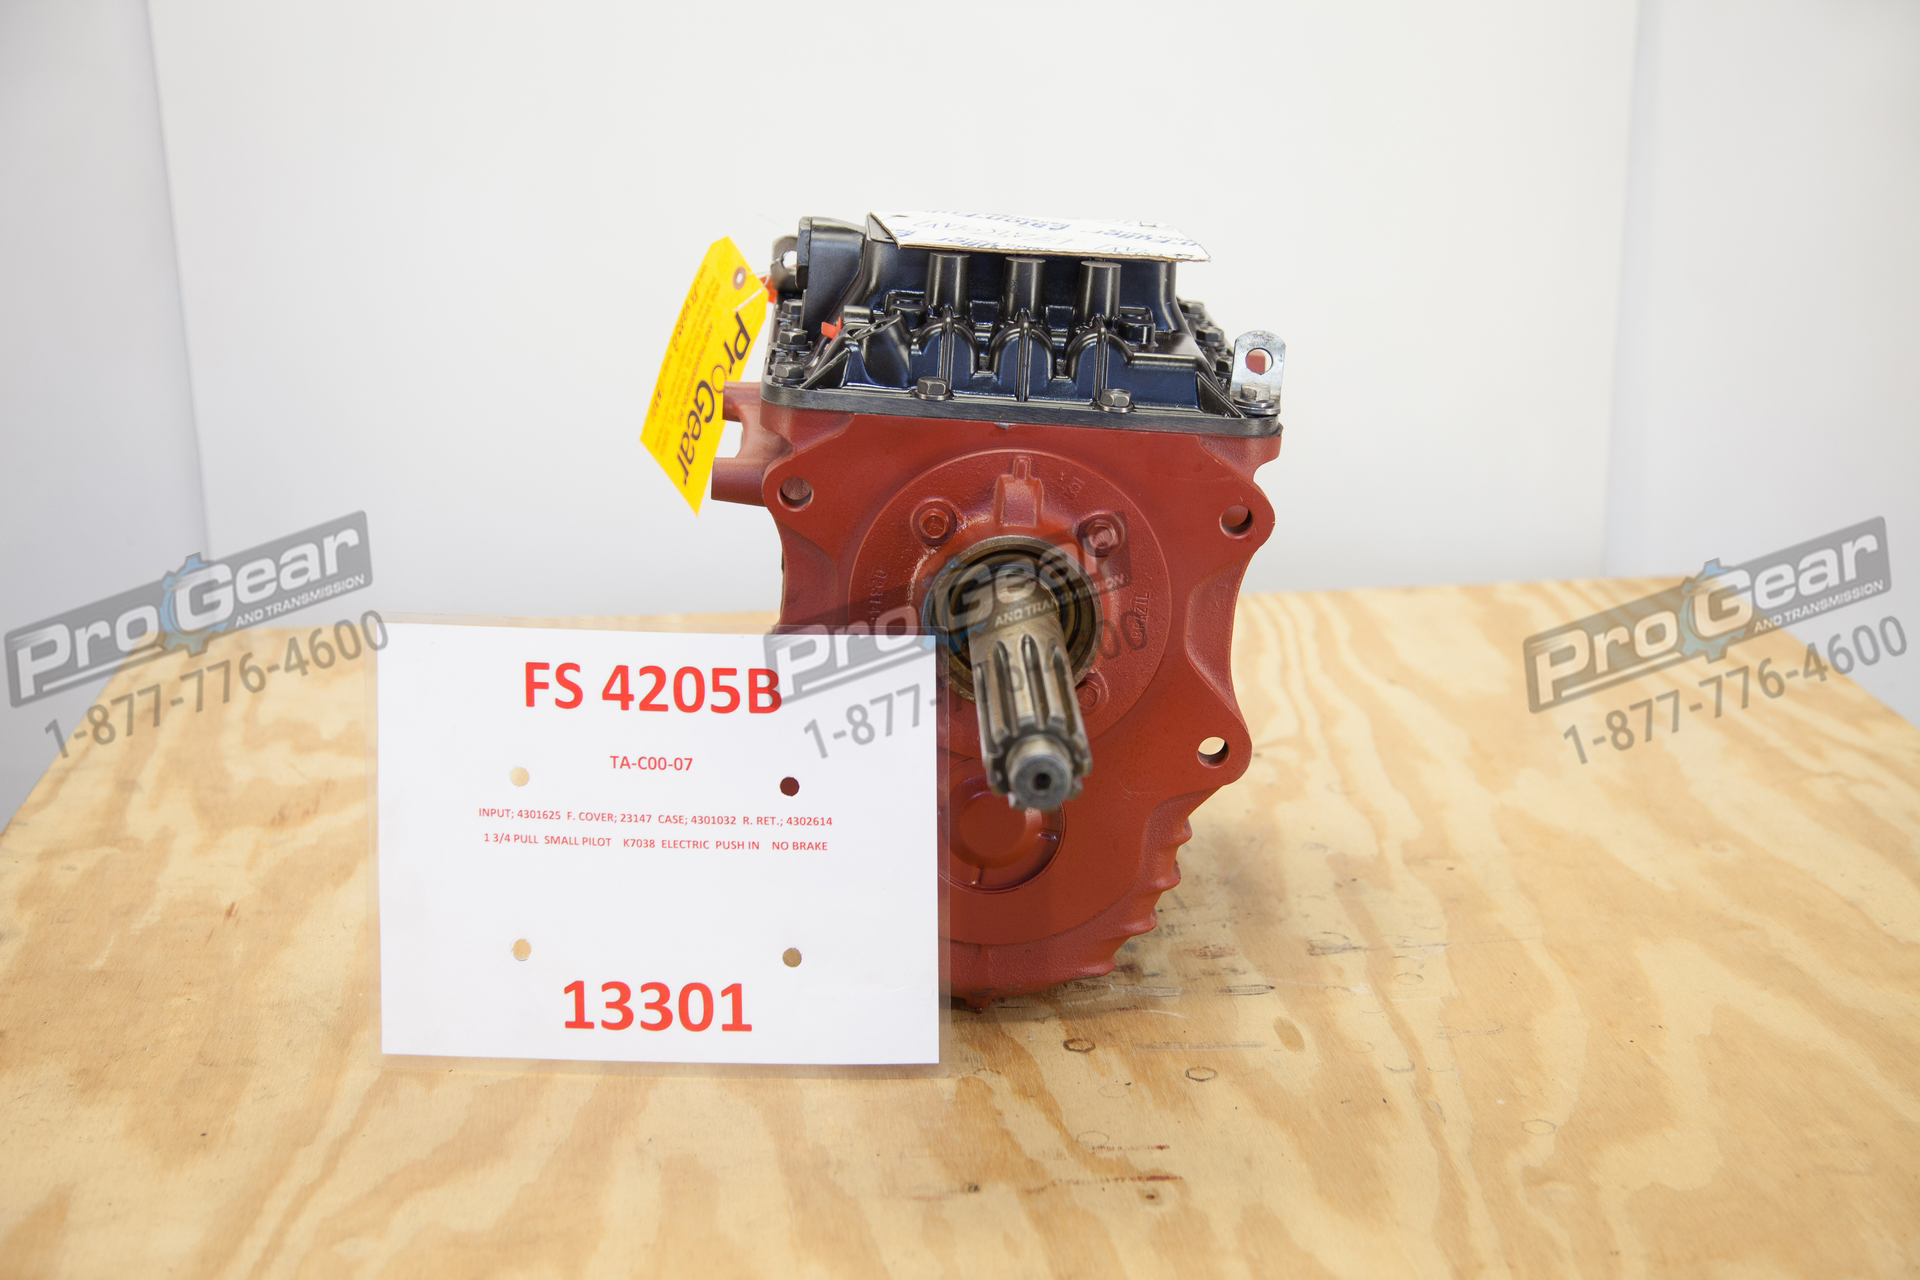 Eaton Fuller RTO-14109A-ATS transmission for sale